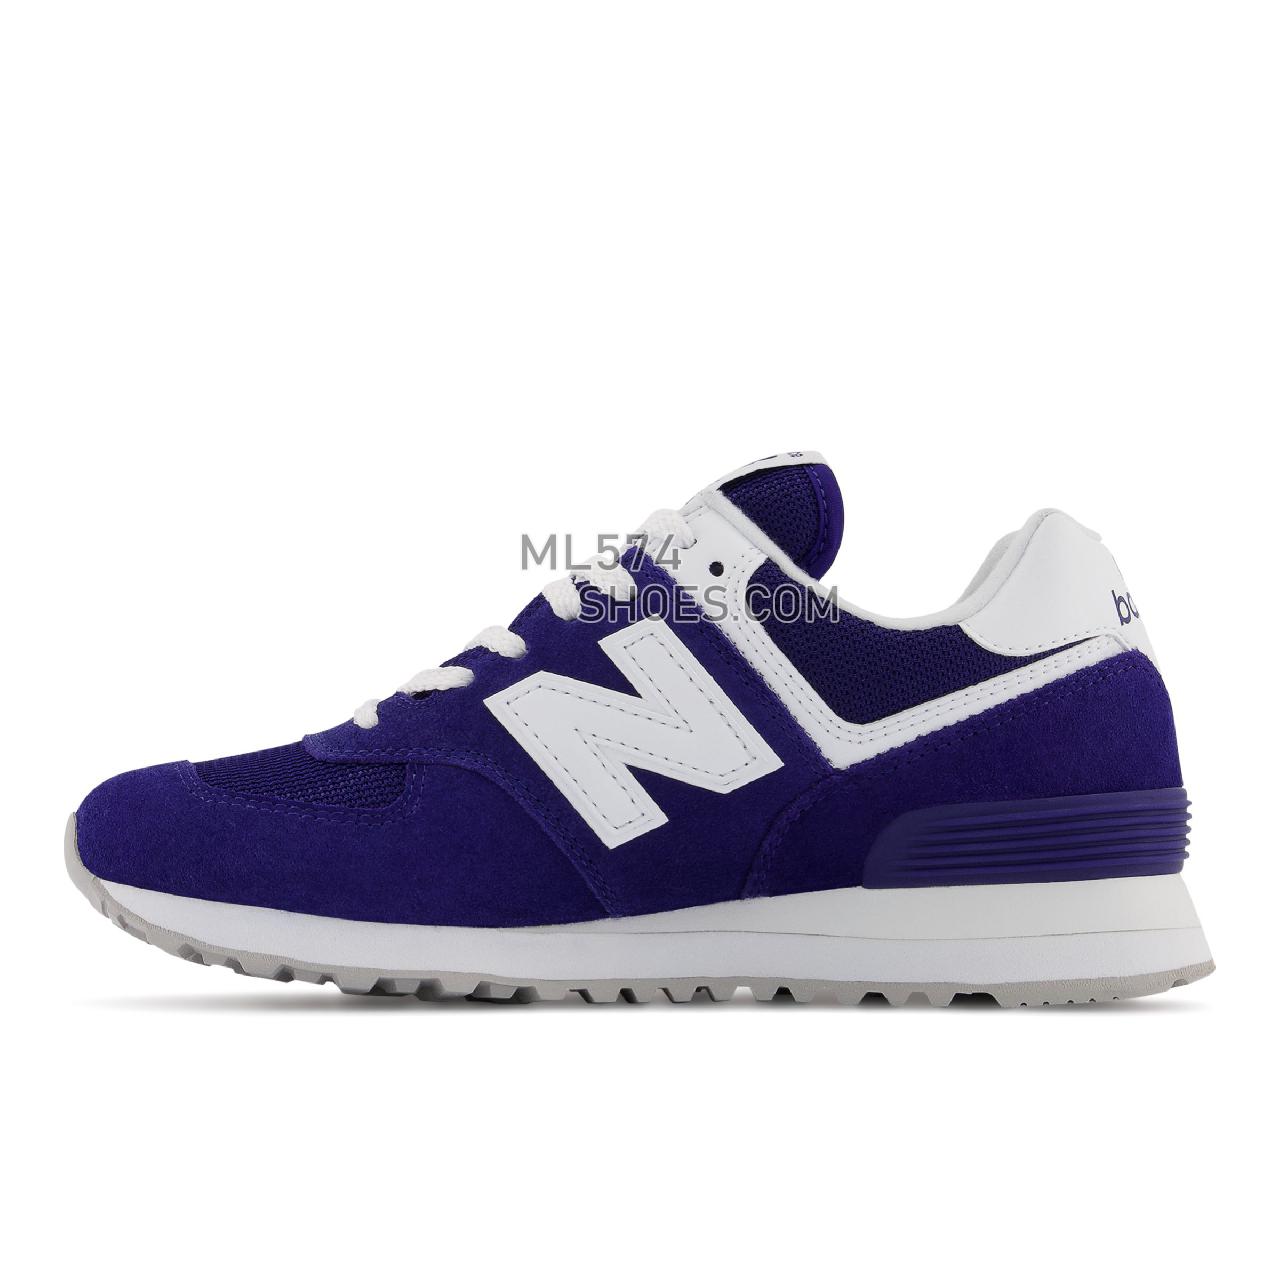 New Balance 574v2 - Women's Classic Sneakers - Victory Blue with White - WL574FK2